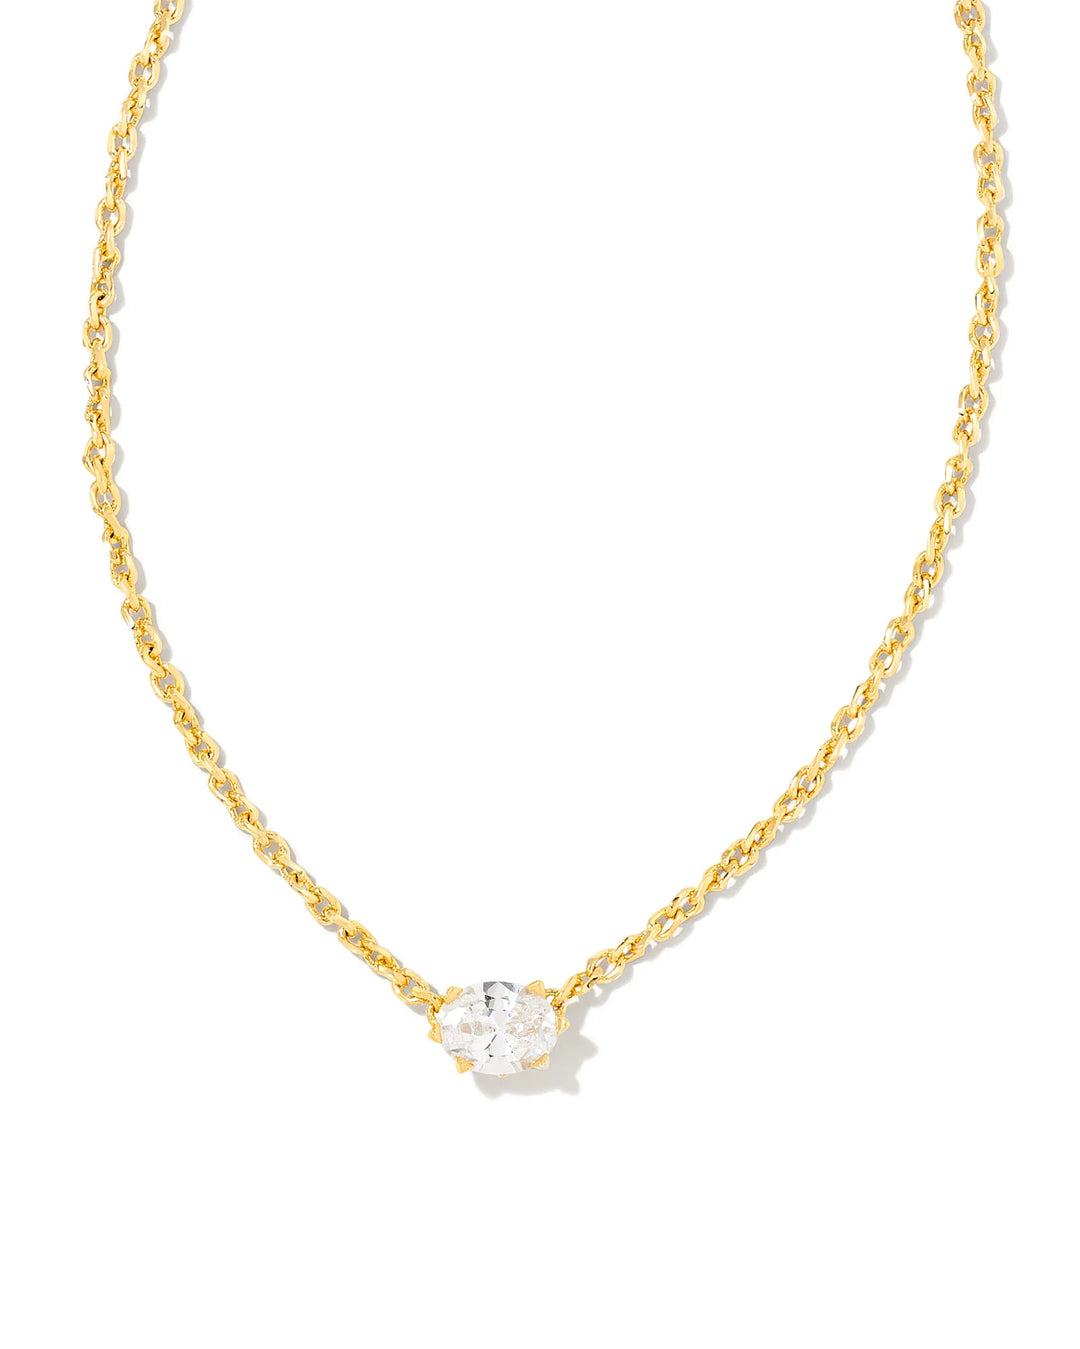 Kendra Scott Cailin Boxed Gold Pendant Necklace in White Crystal